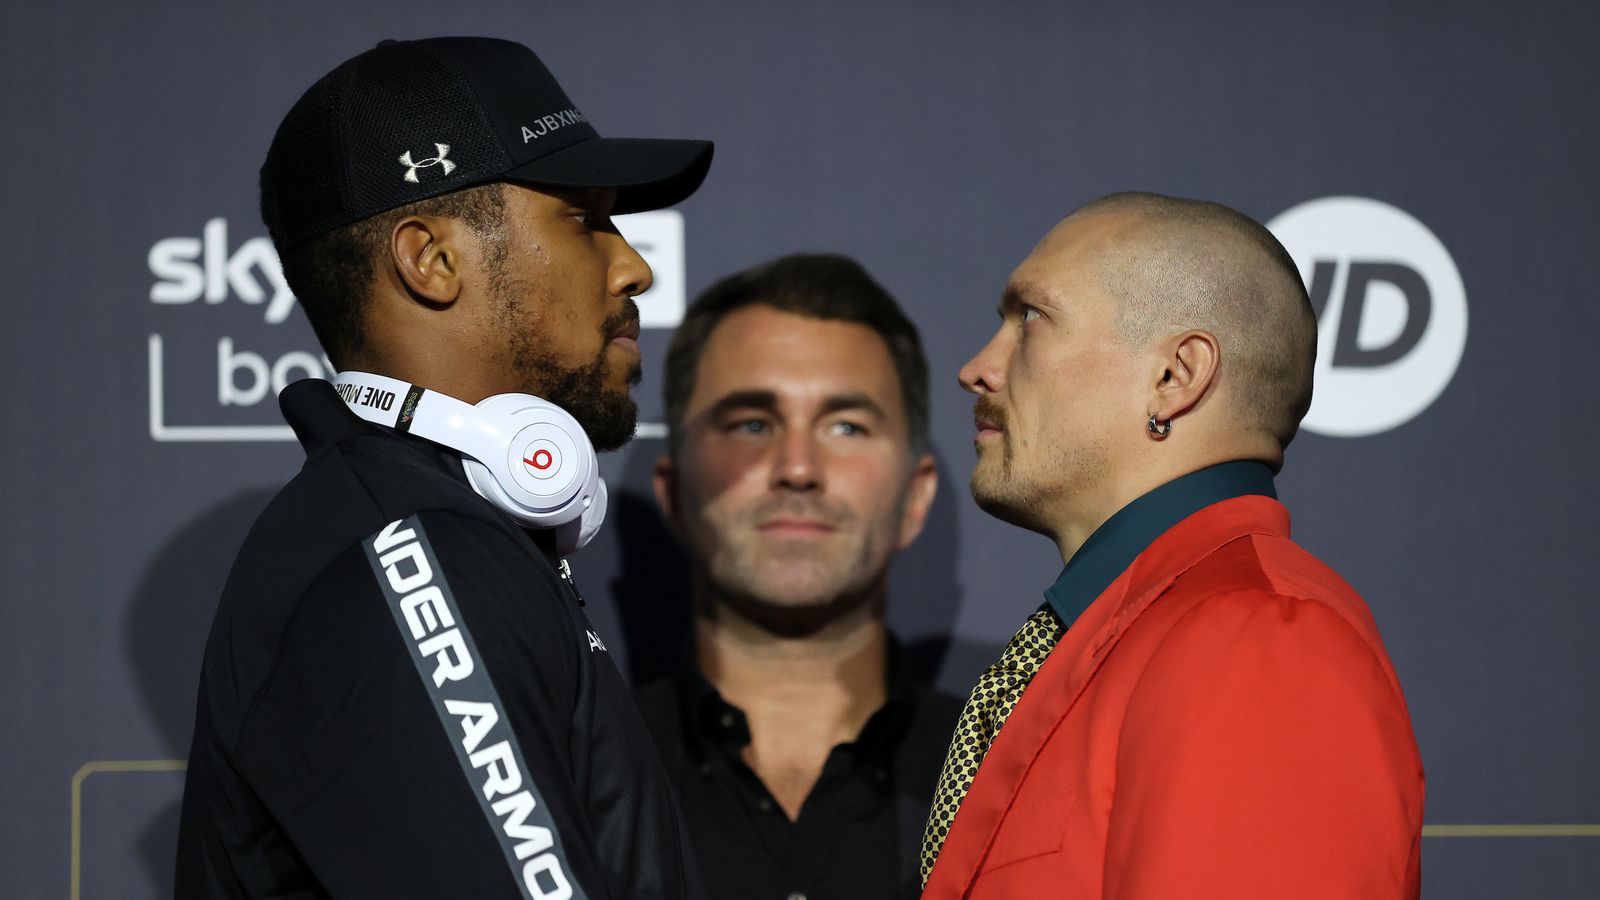 Anthony Joshua and Oleksander Usyk face-off ahead of Saturday fight